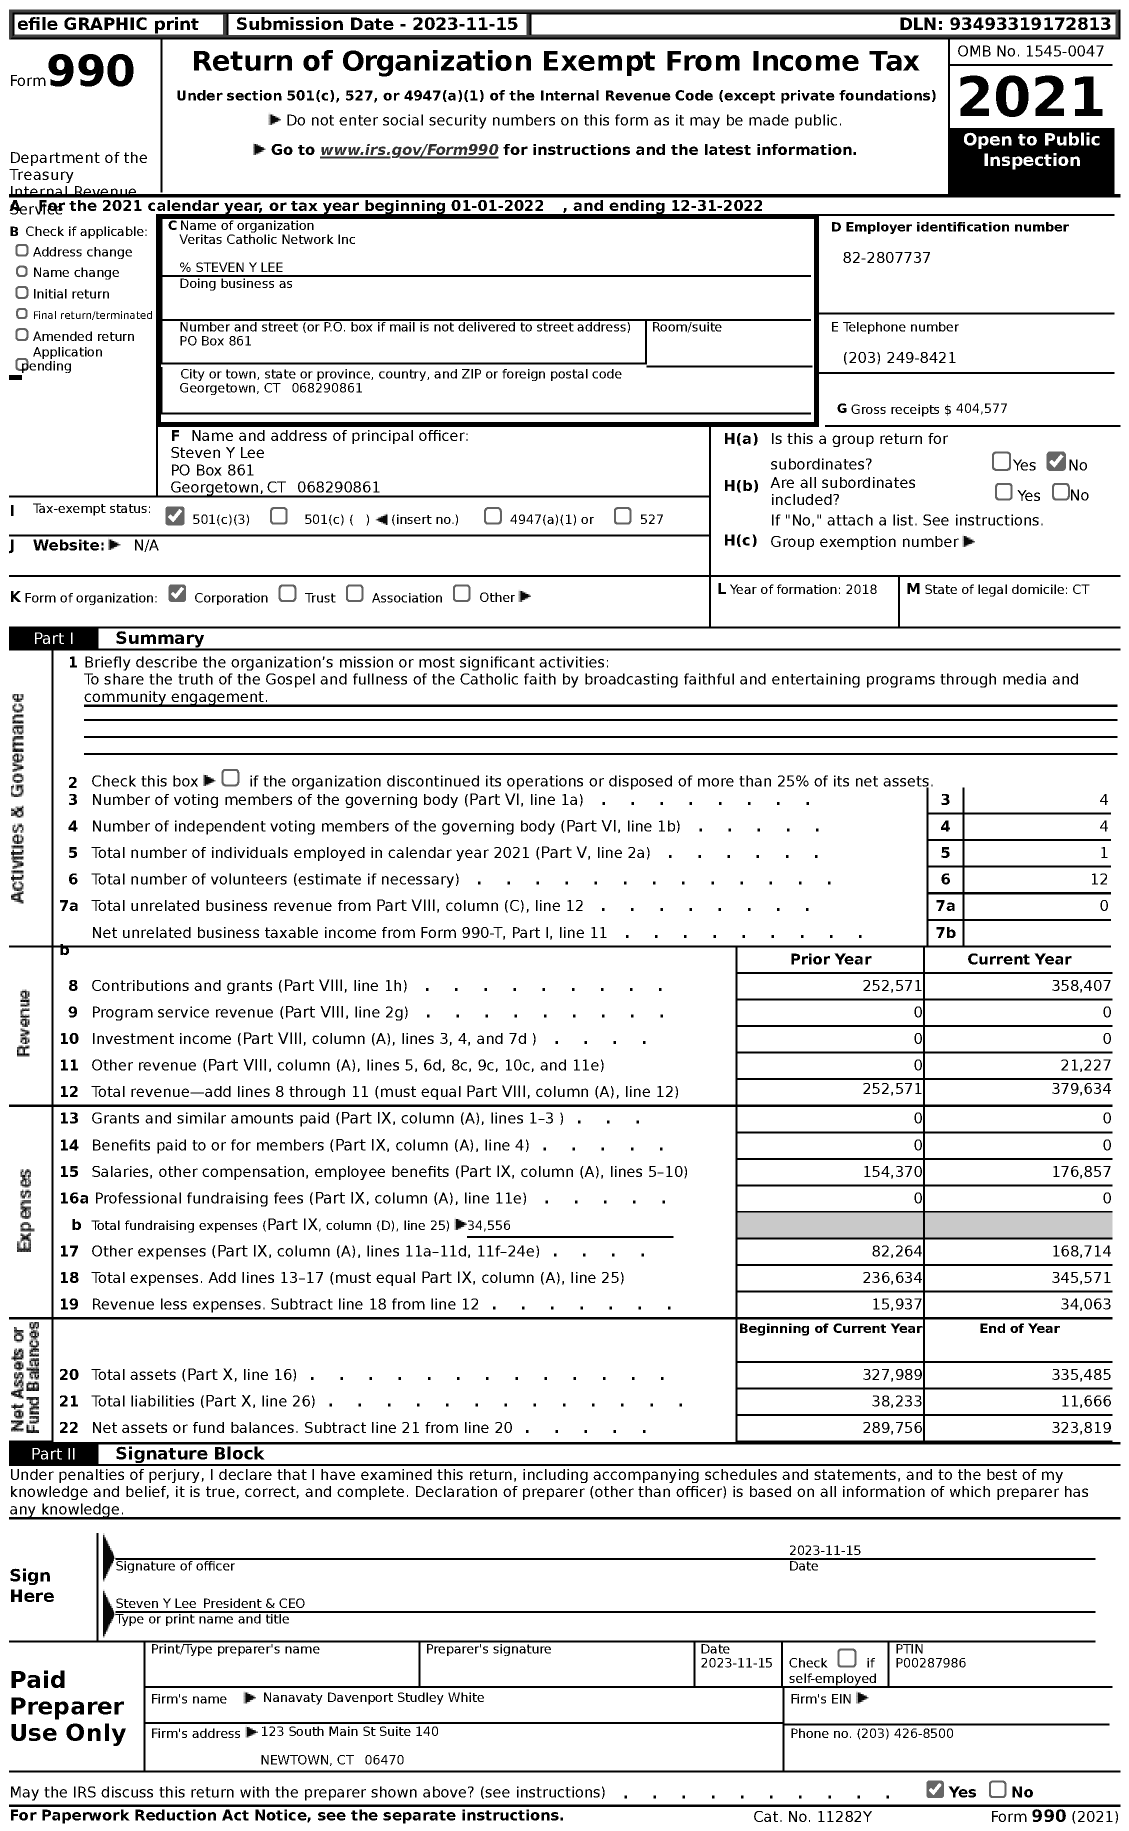 Image of first page of 2022 Form 990 for Veritas Catholic Network